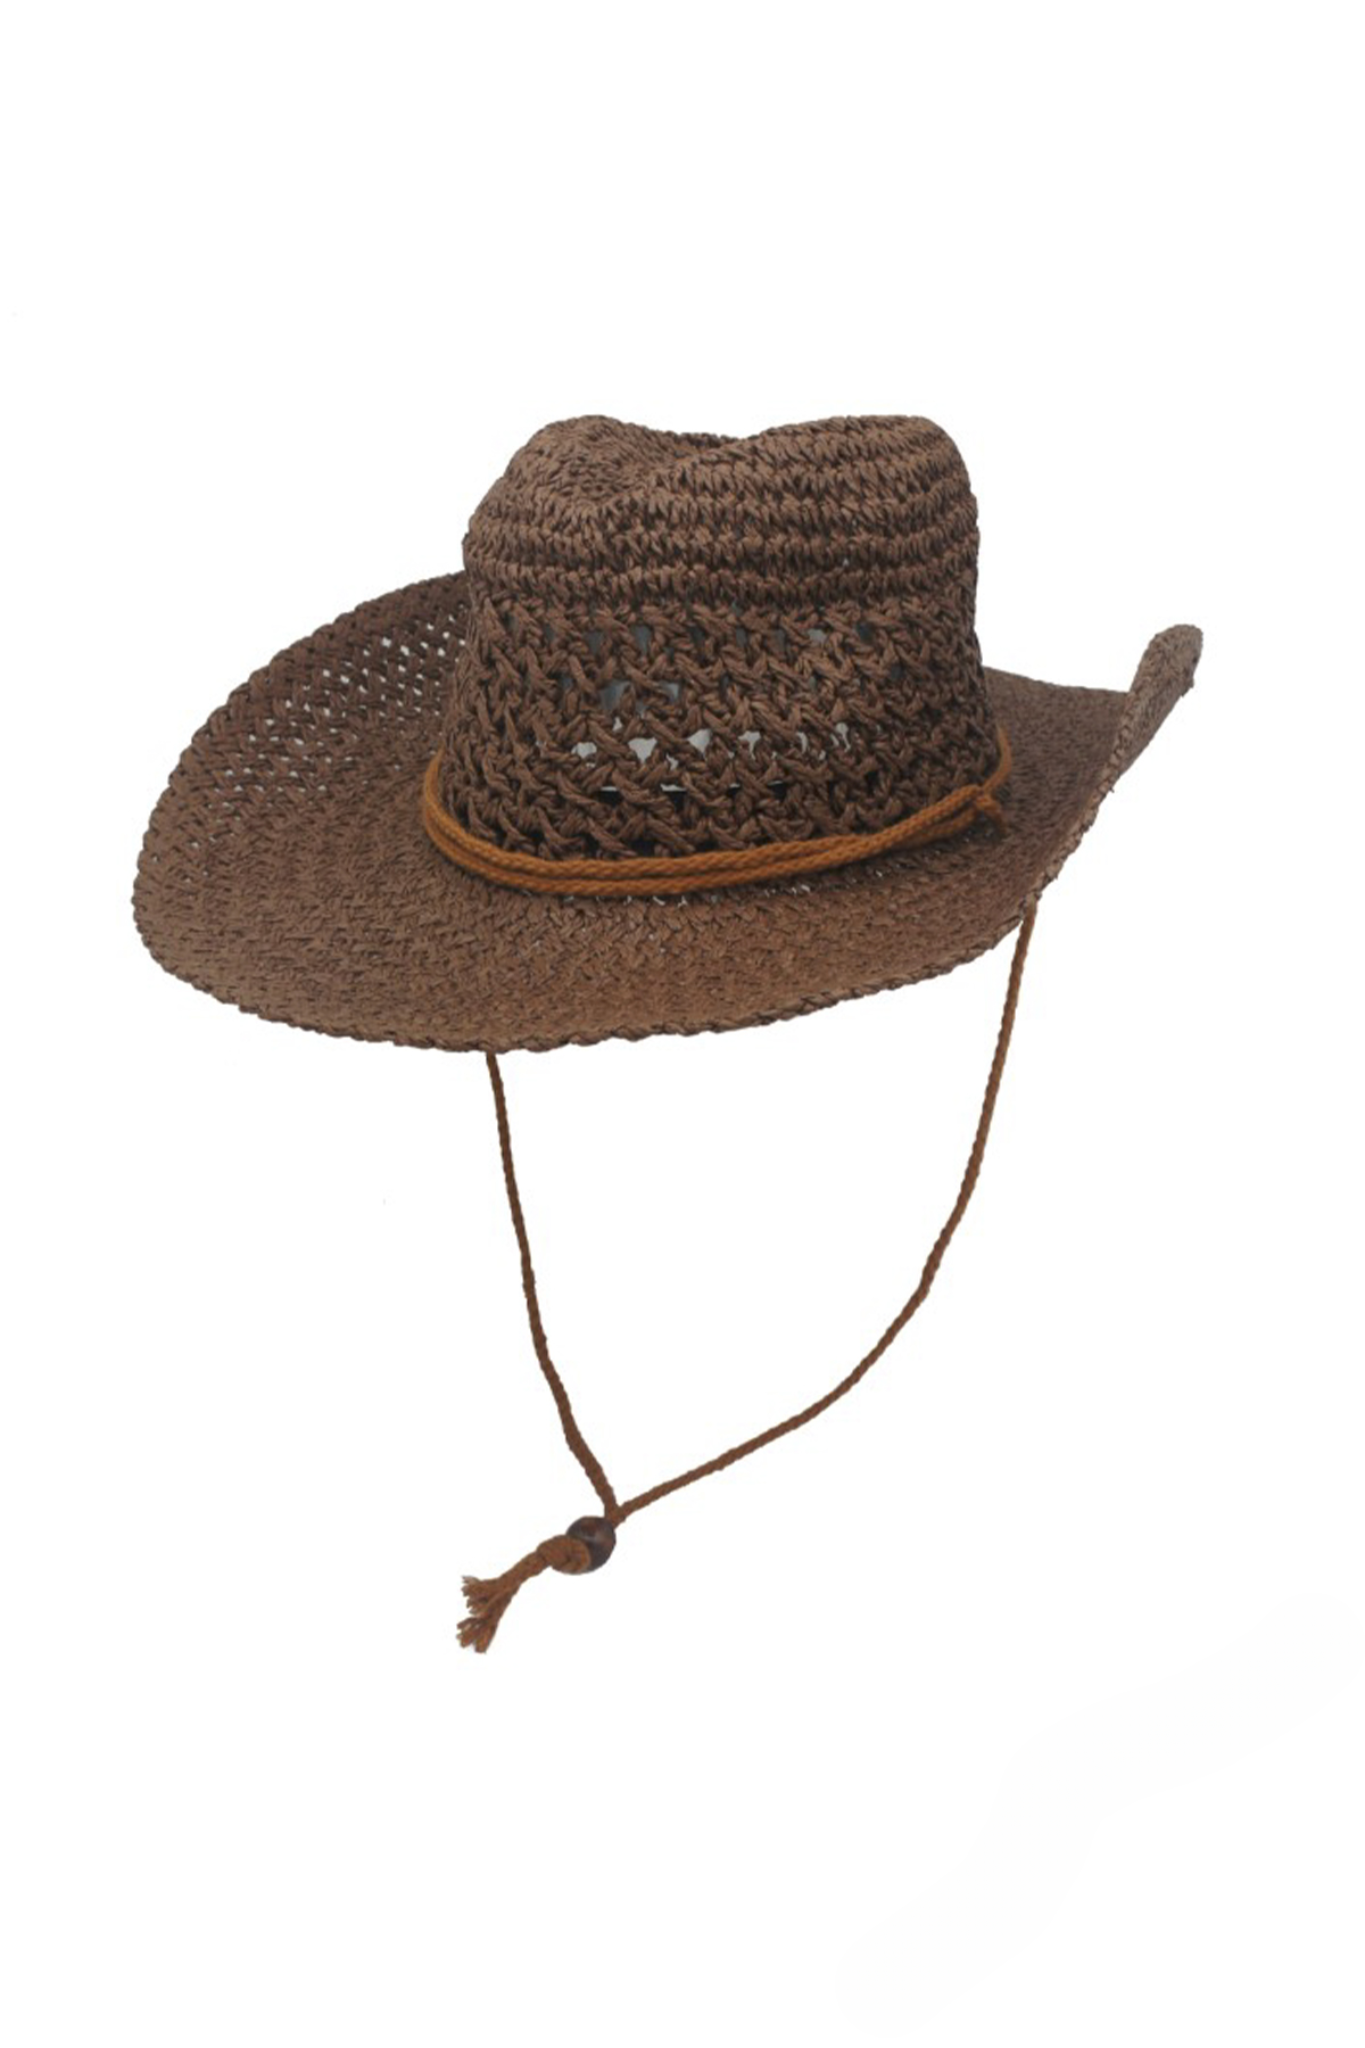 View 4 of Brown Cowboy Hat, a Hats from Larrea Cove. Detail: .